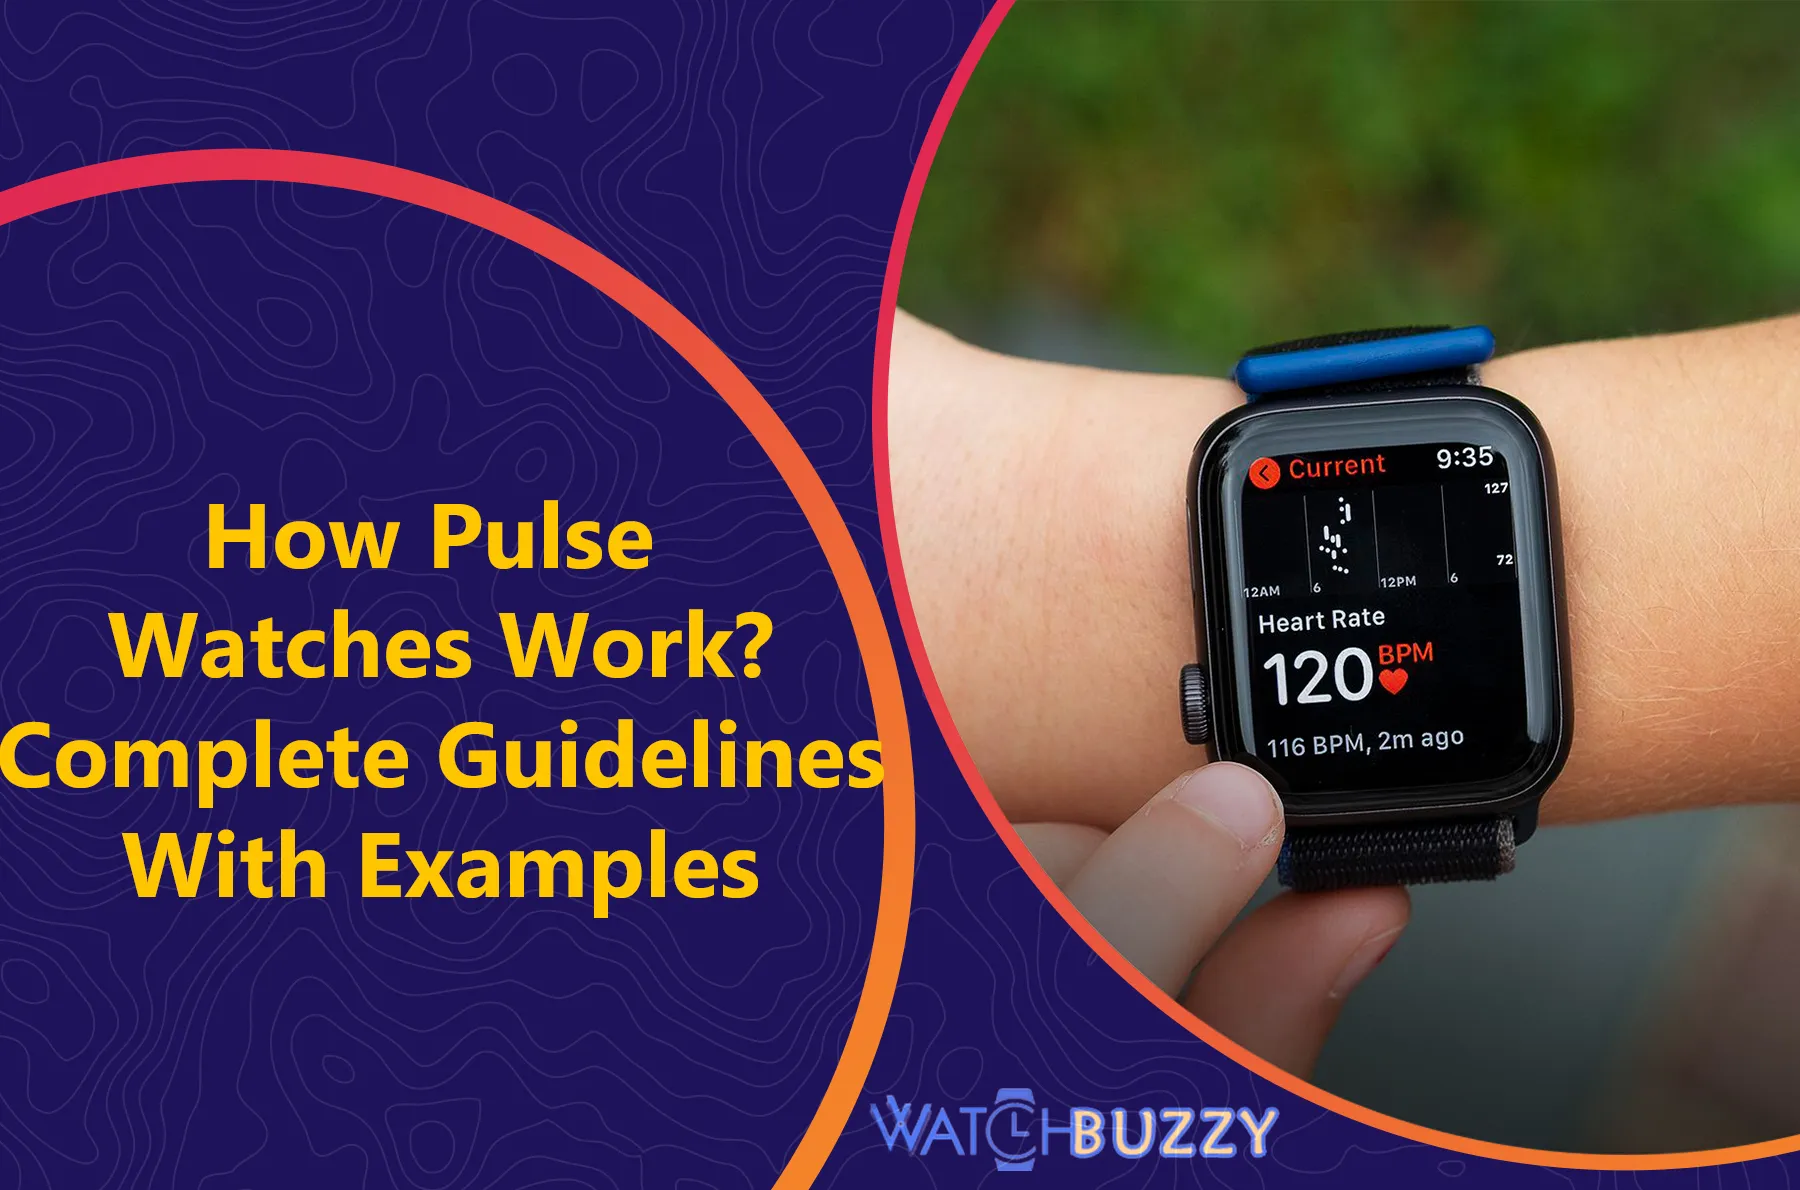 How Pulse Watches Work? Complete Guidelines With Examples